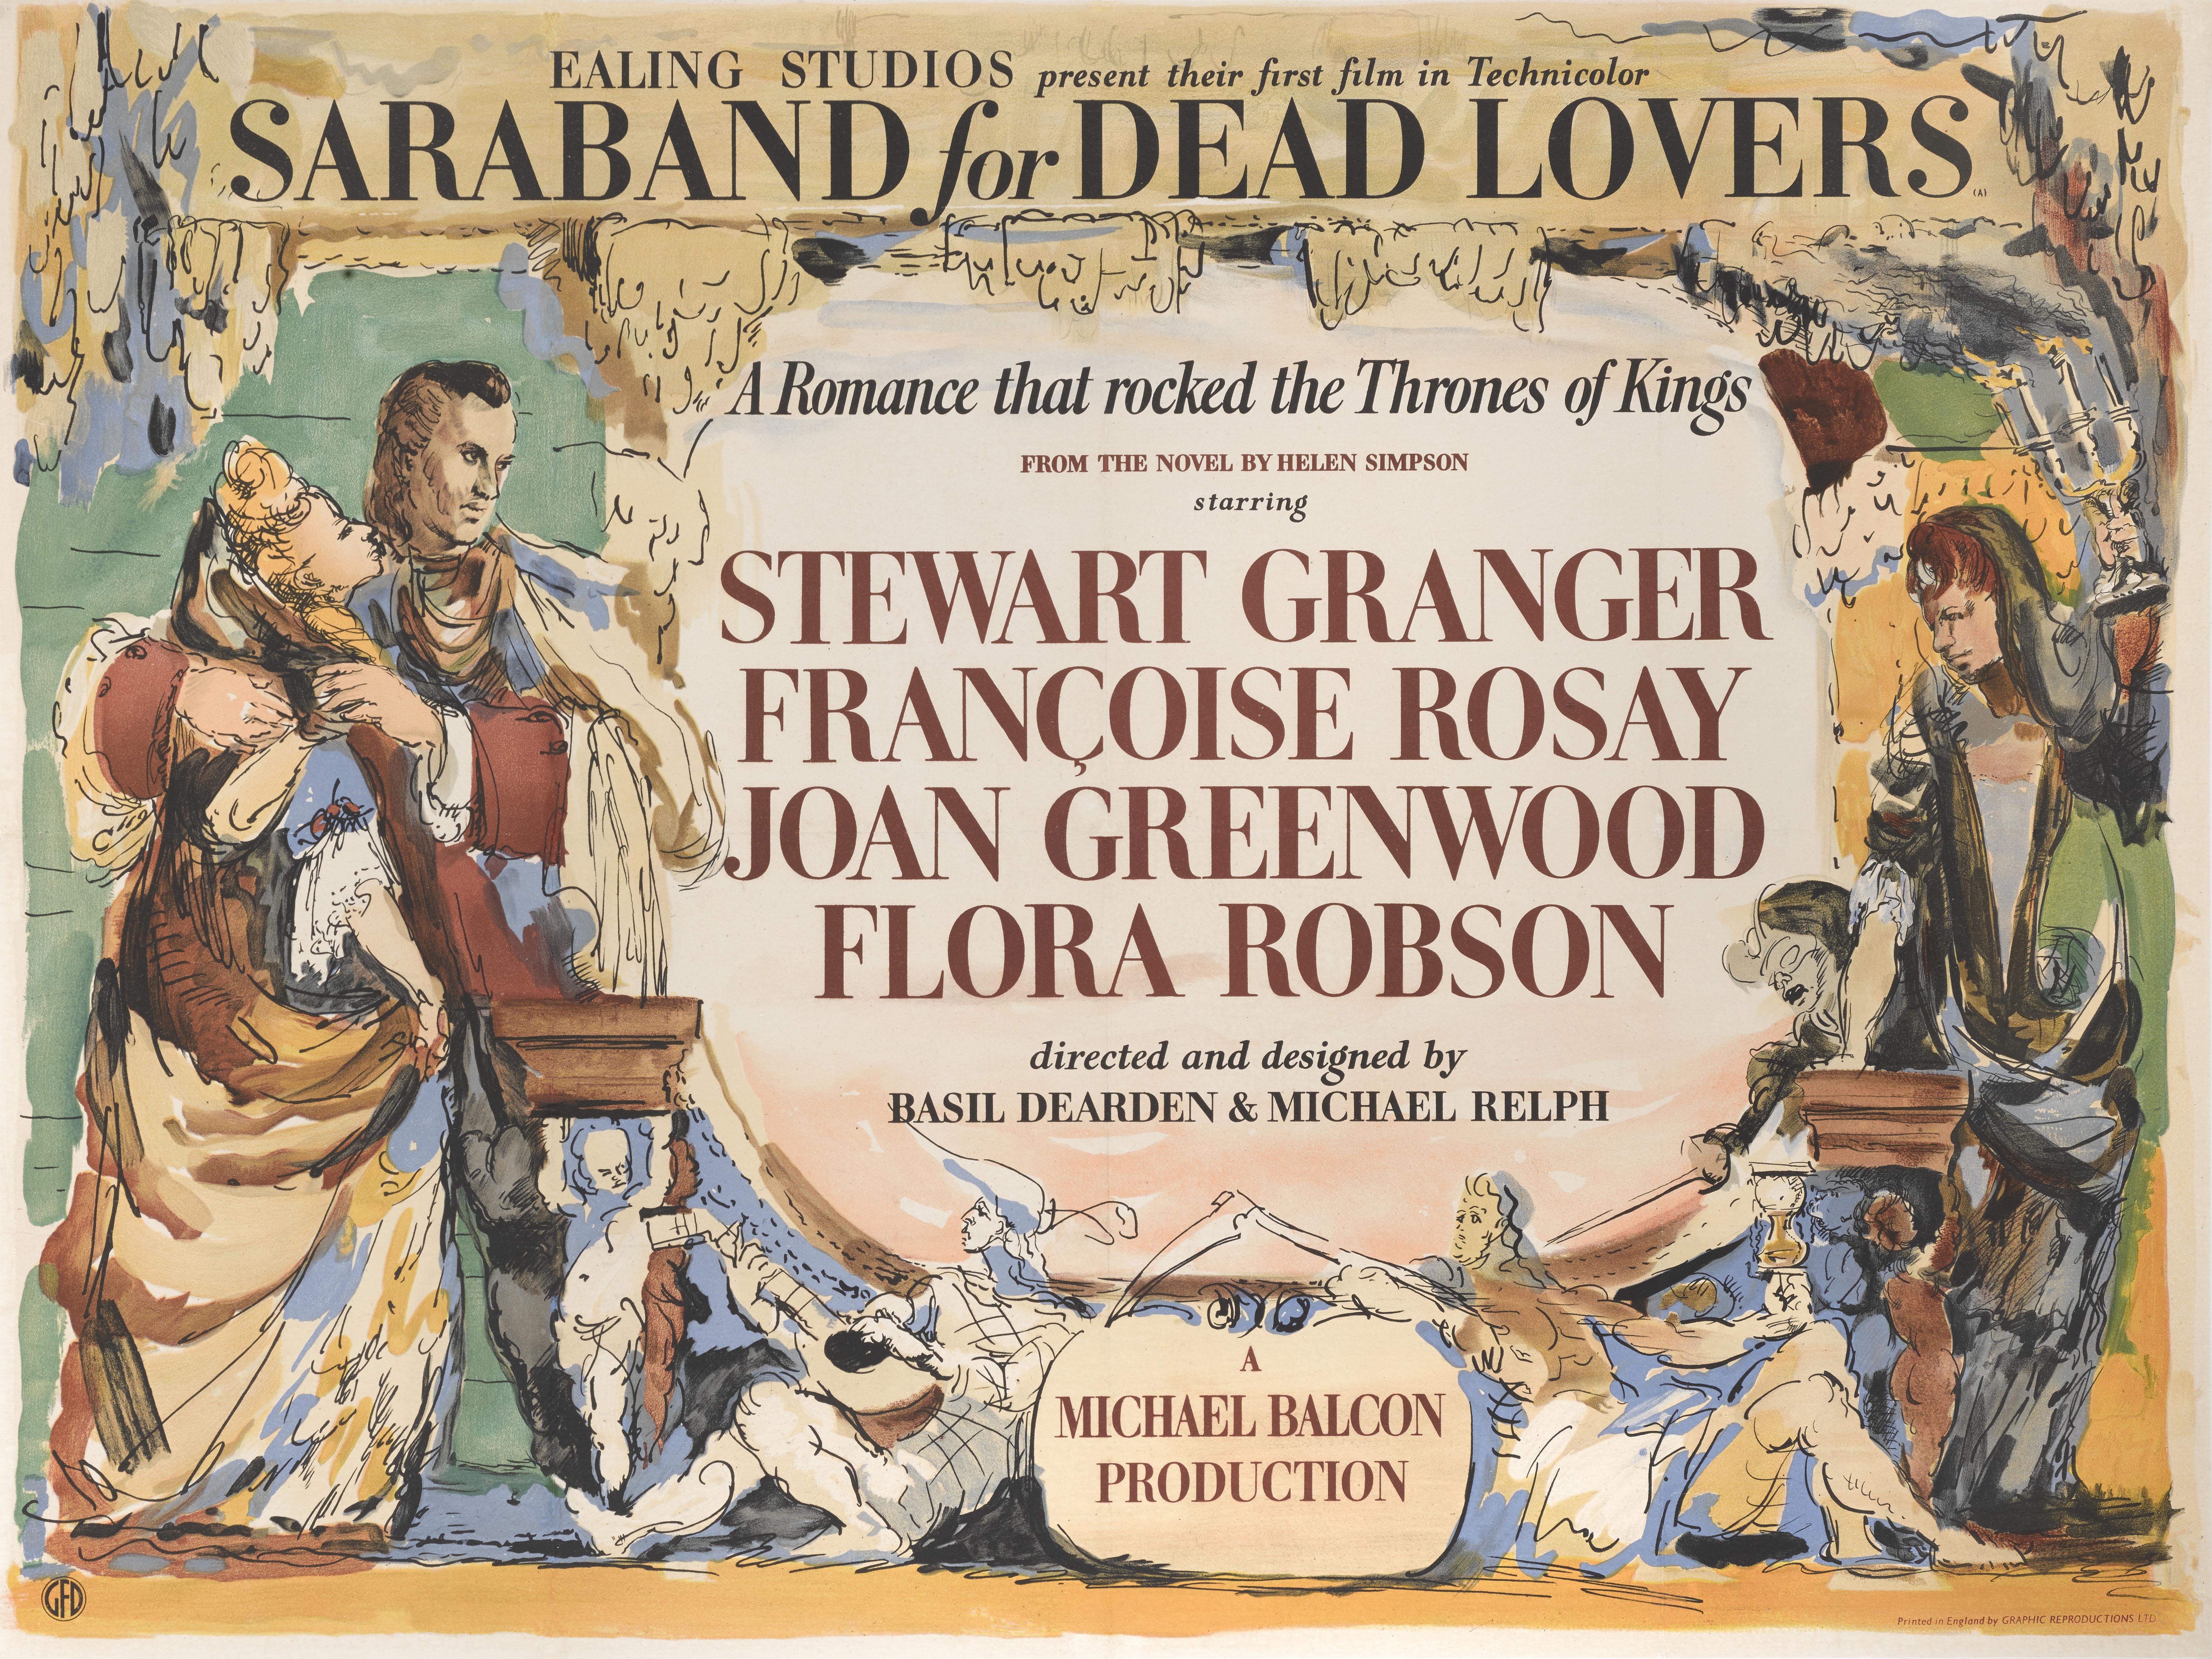 This is a rare original British film poster for the 1948 Ealing Studios drama film Saraband for Dead Lovers.
This film was starring  directed by Basil Dearden and starred Stewart Granger, Joan Greenwood and Flora Robson.
An image of this poster can